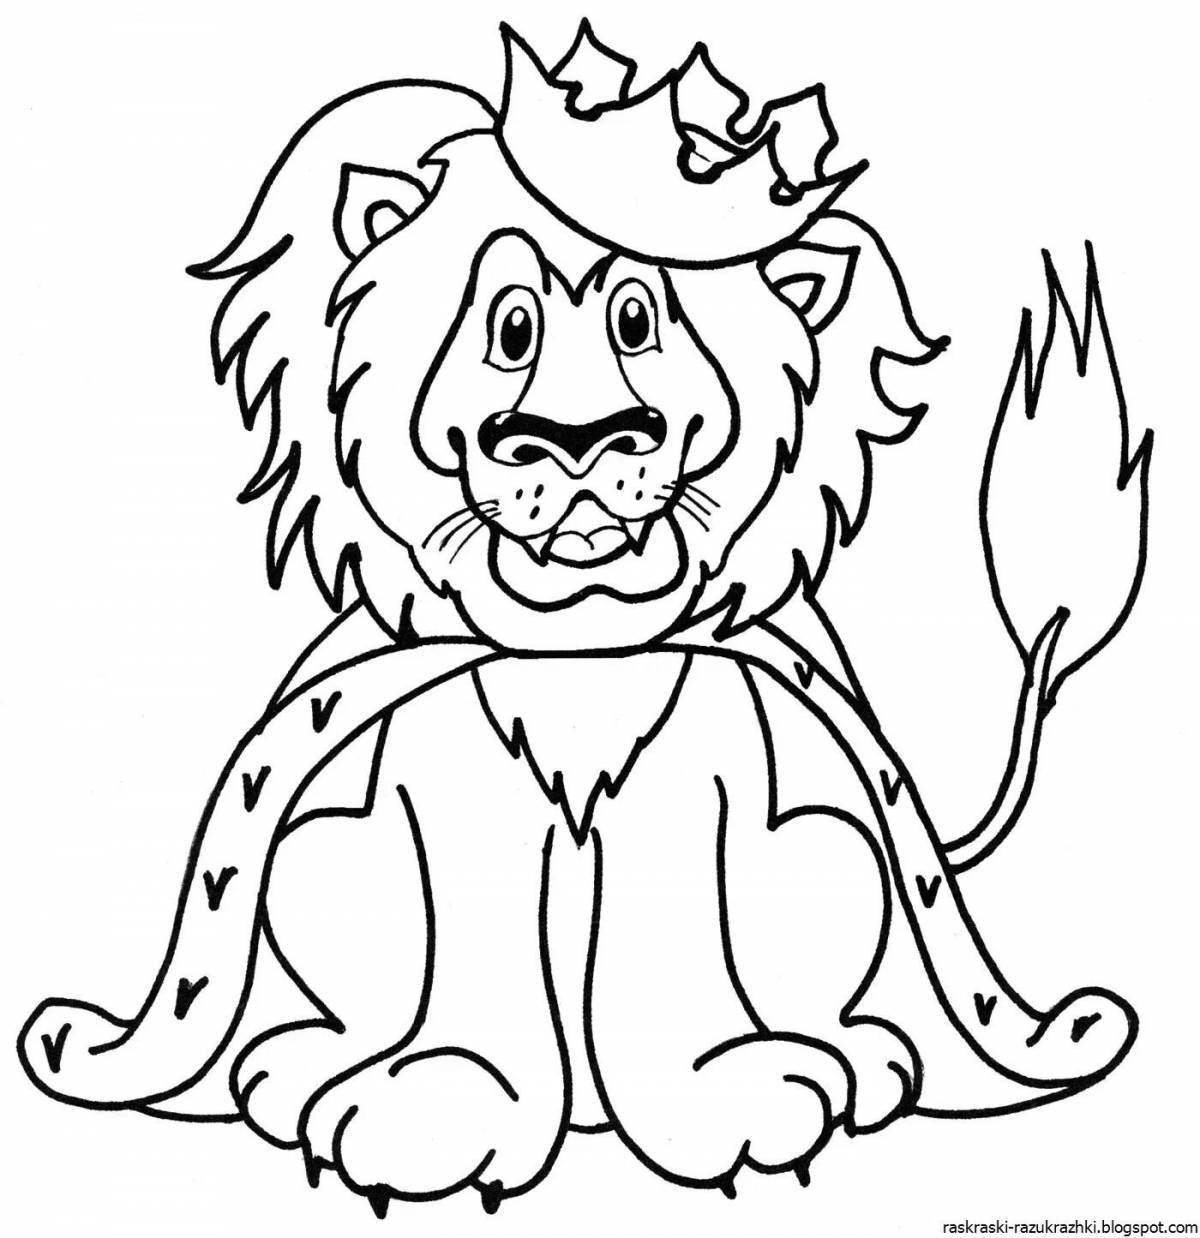 Coloring book shining lion for children 6-7 years old